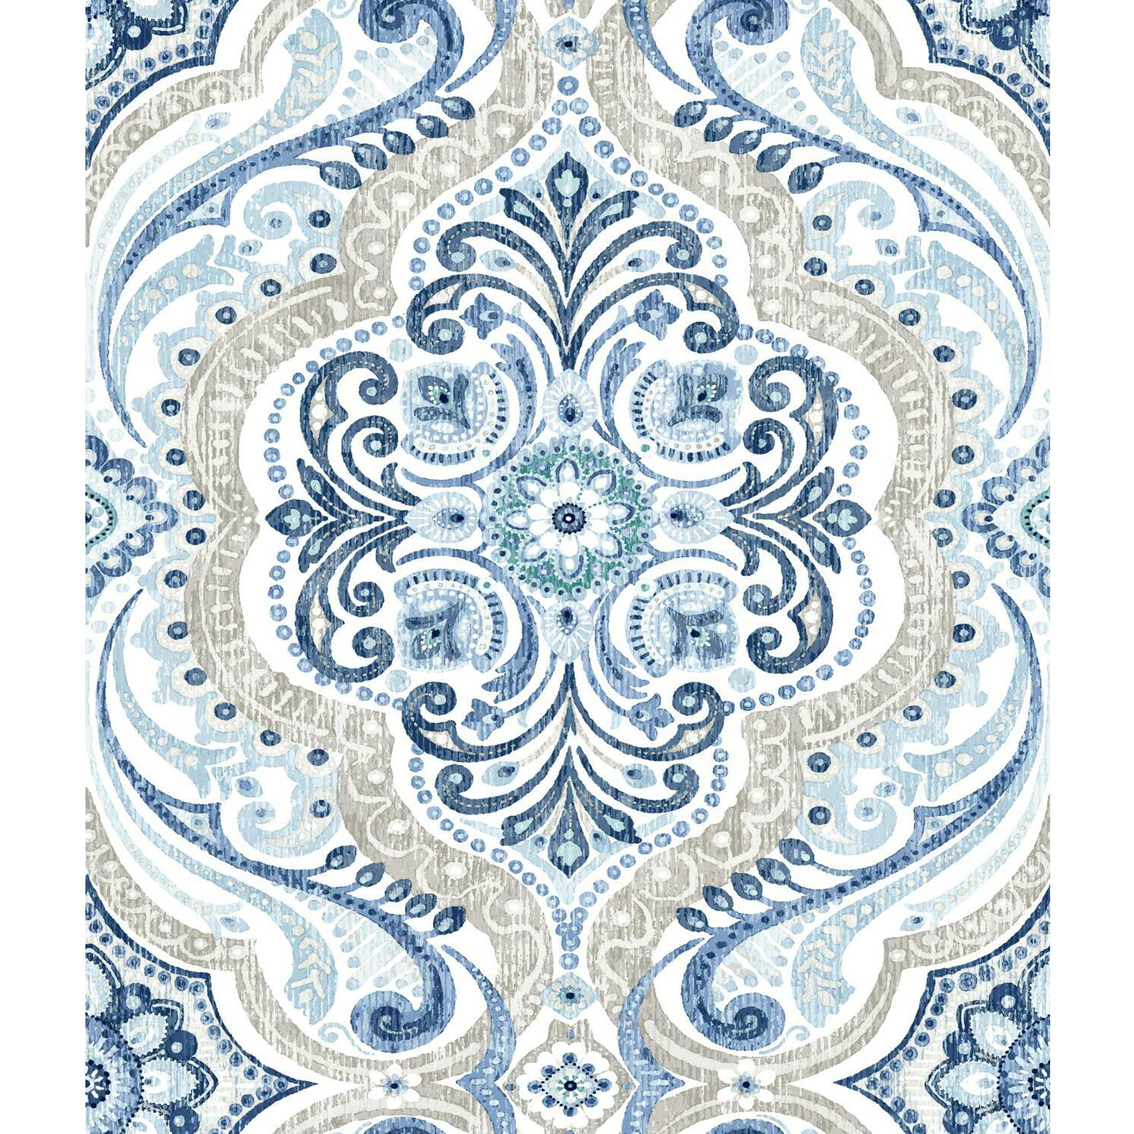 RoomMates Bohemian Damask Peel and Stick Wallpaper - Image 7 of 8